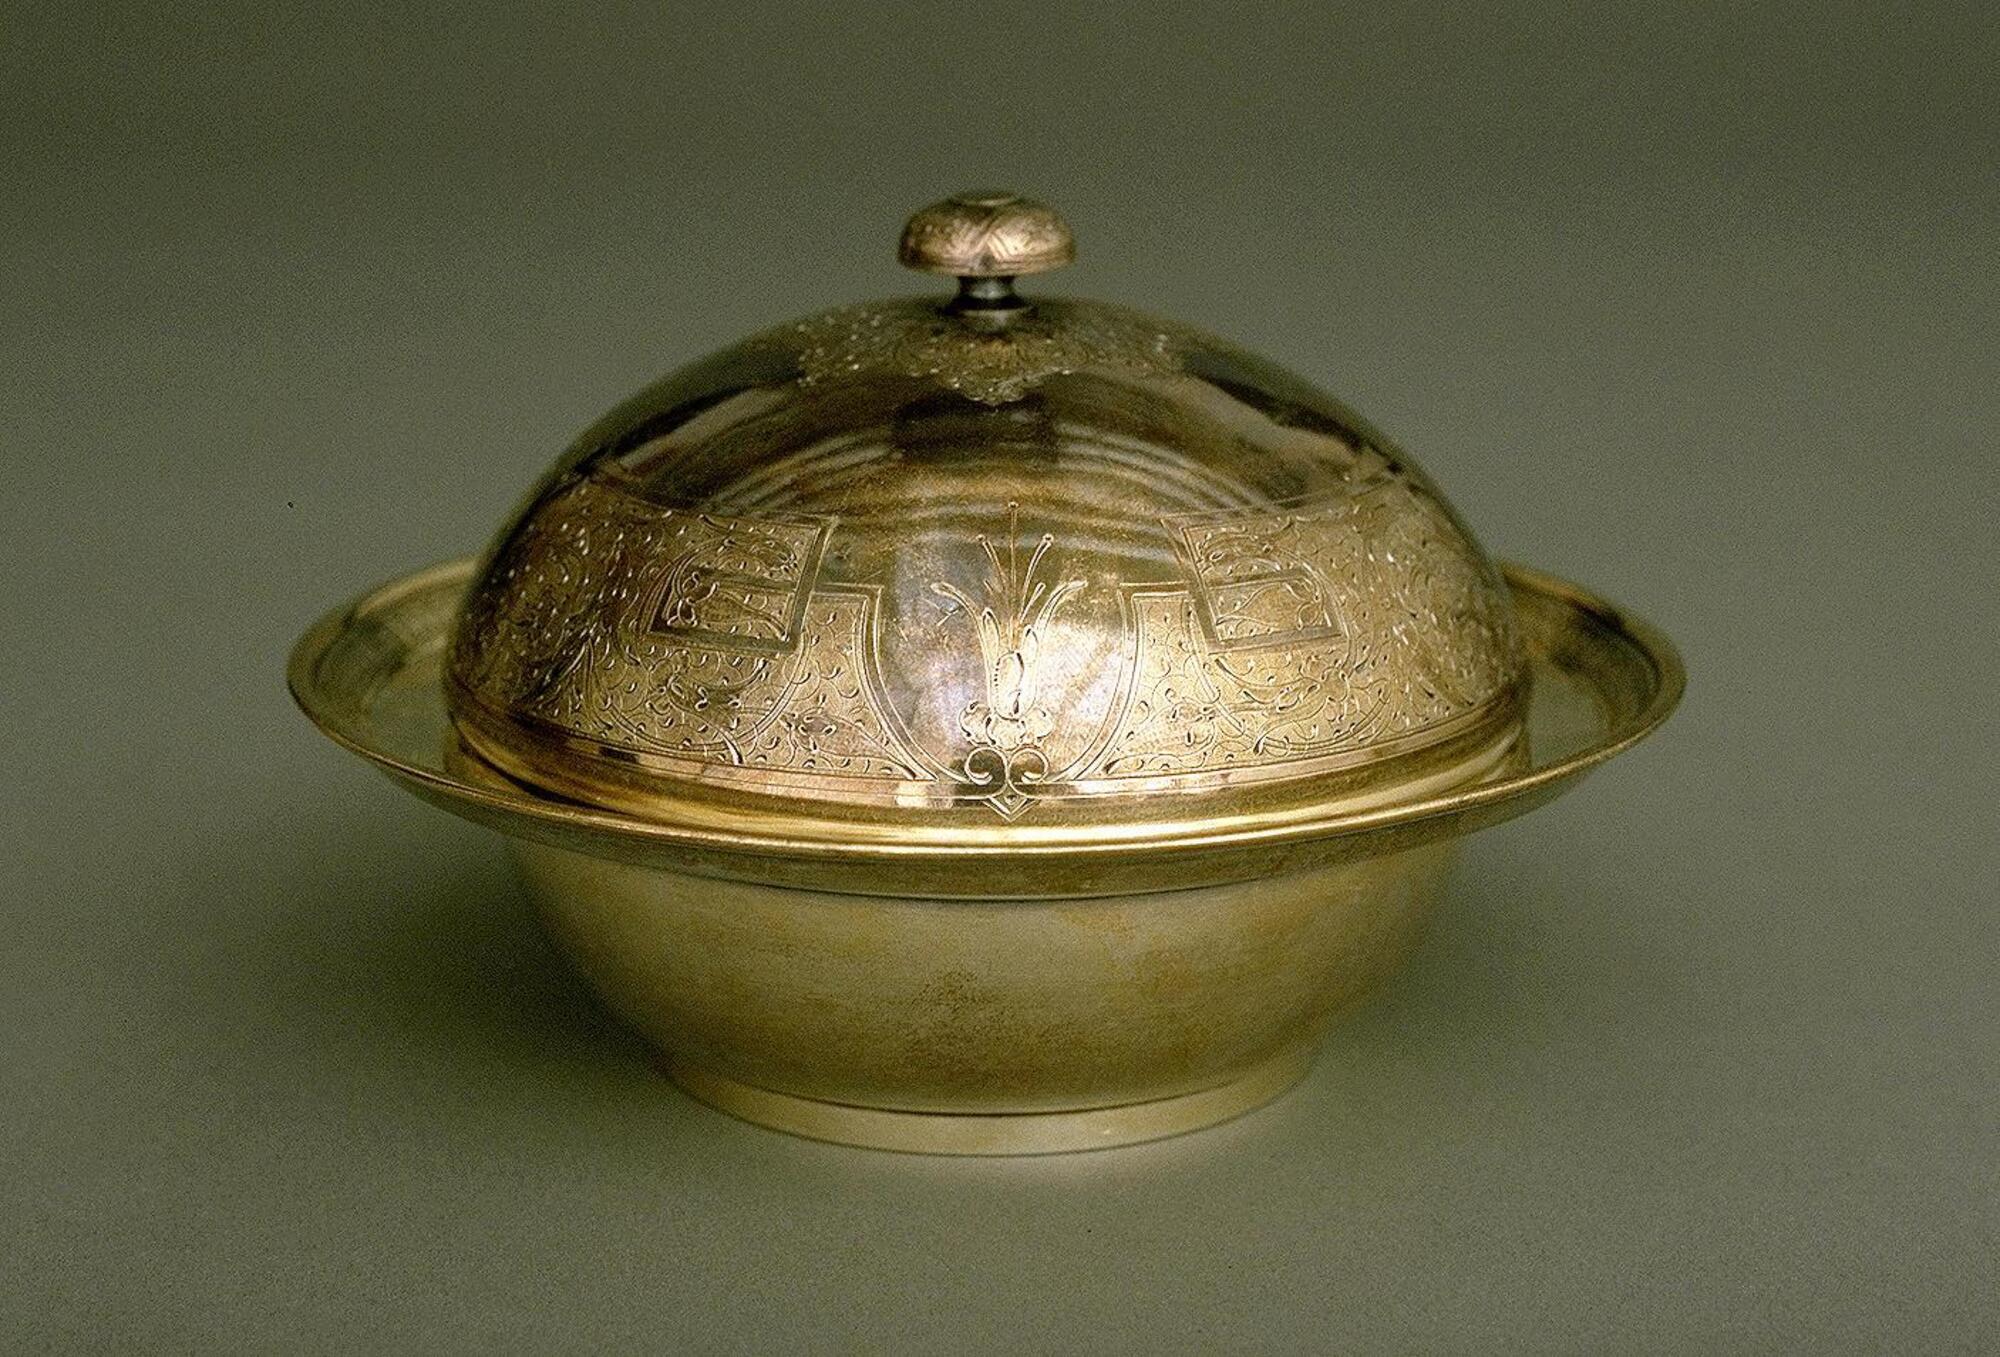 Silver bowl-shaped vessel with dome-shaped lid